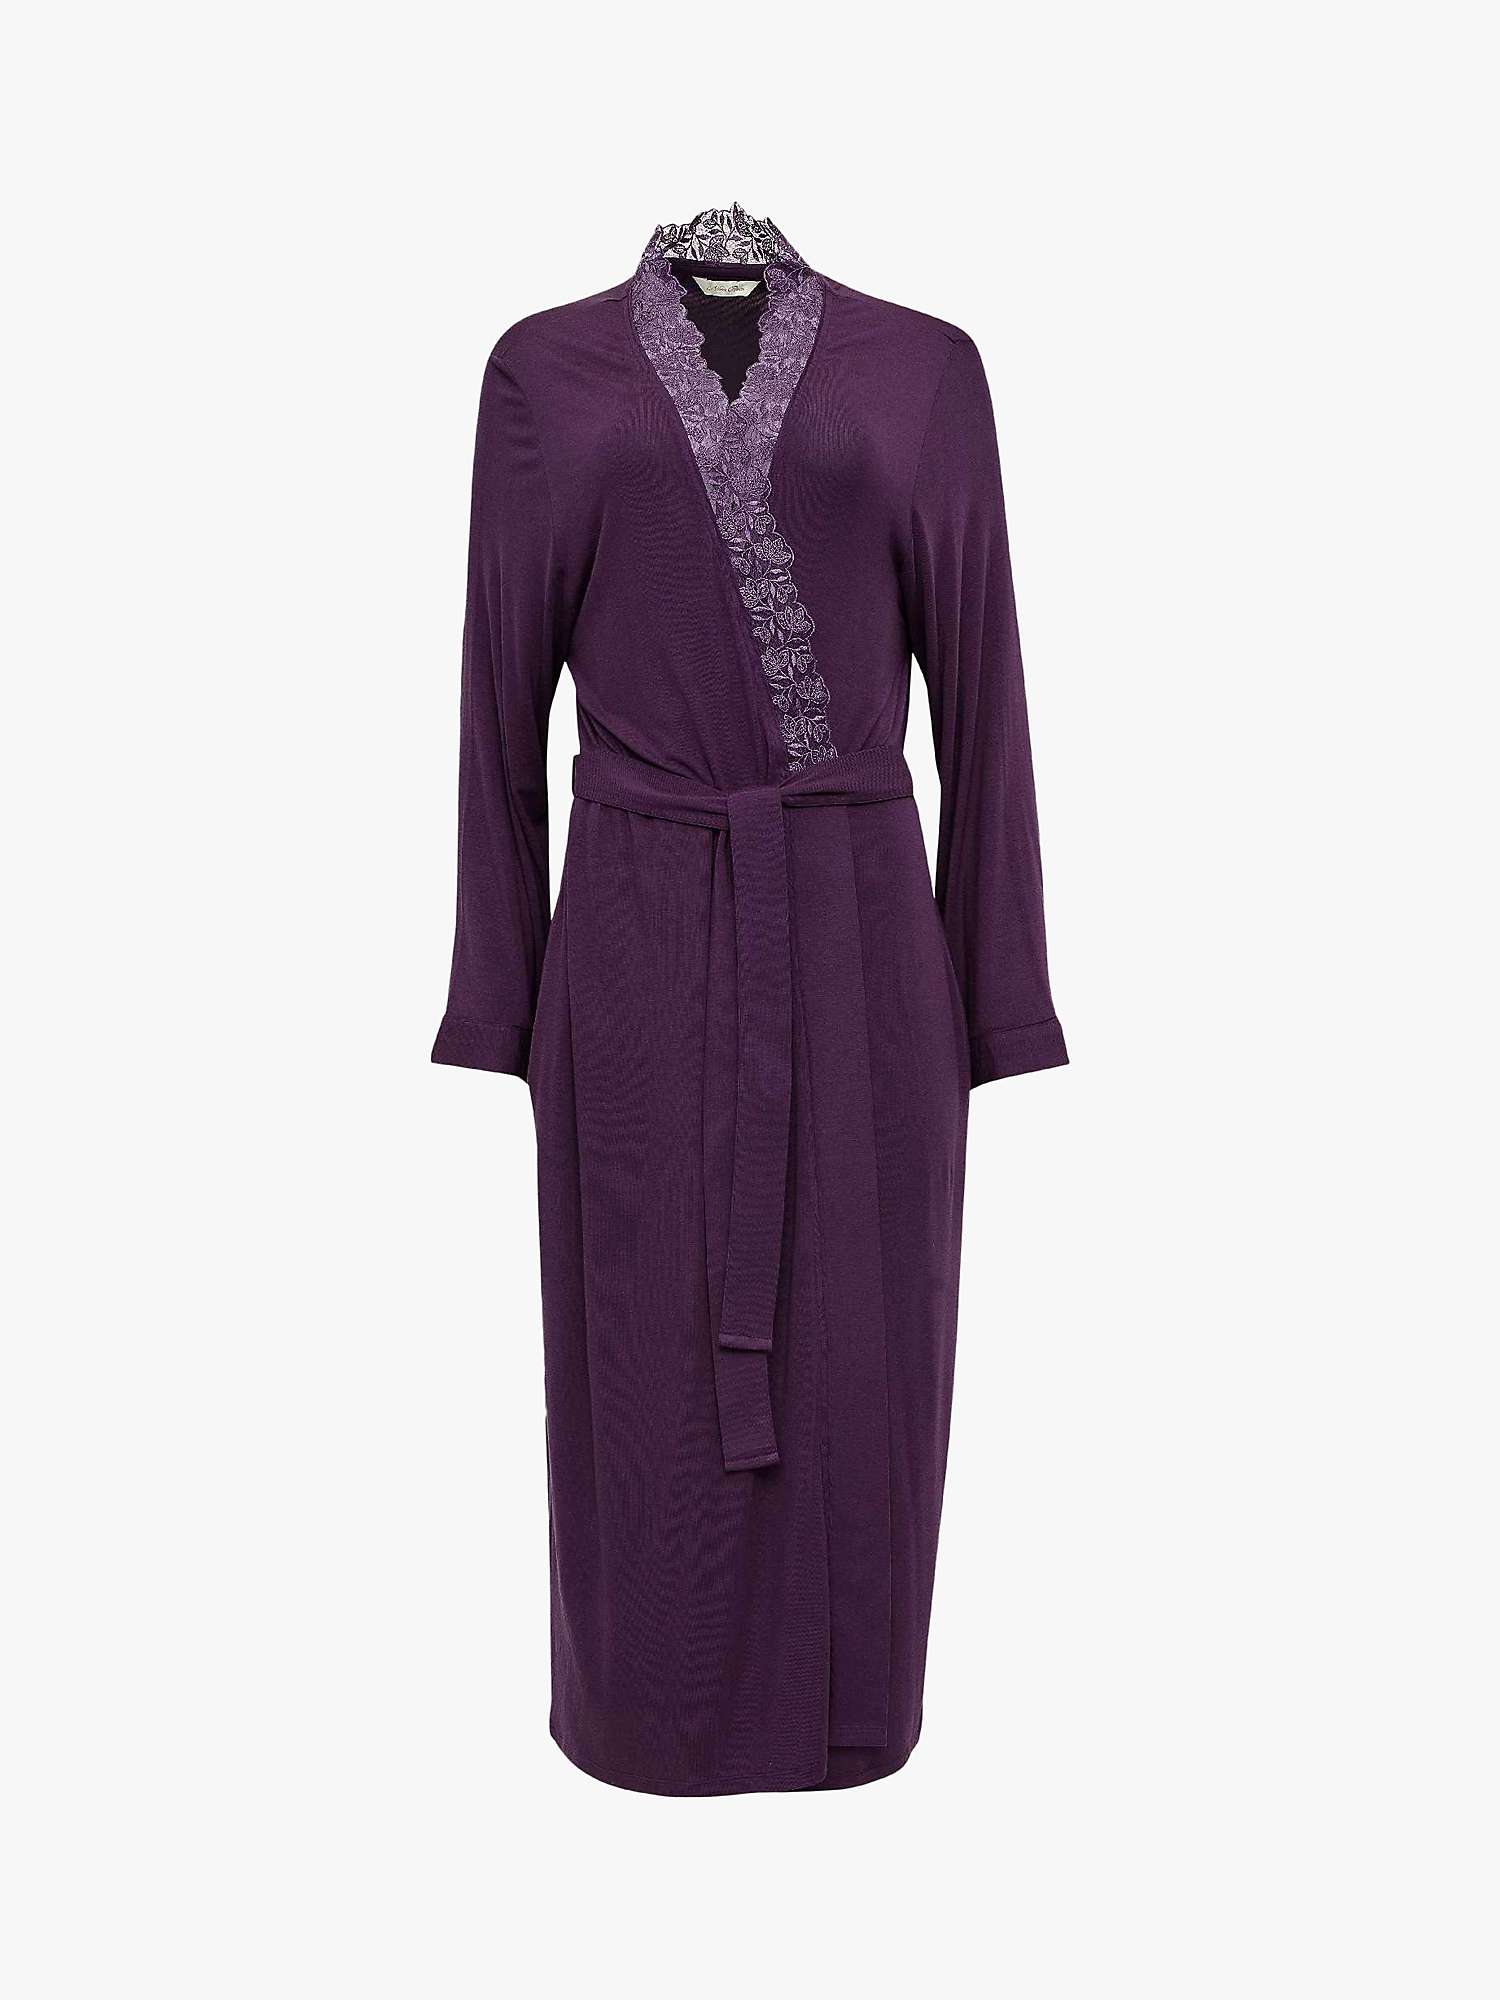 Buy Nora Rose by Cyberjammies Maeve Lace Detail Jersey Knit Dressing Gown, Purple Online at johnlewis.com